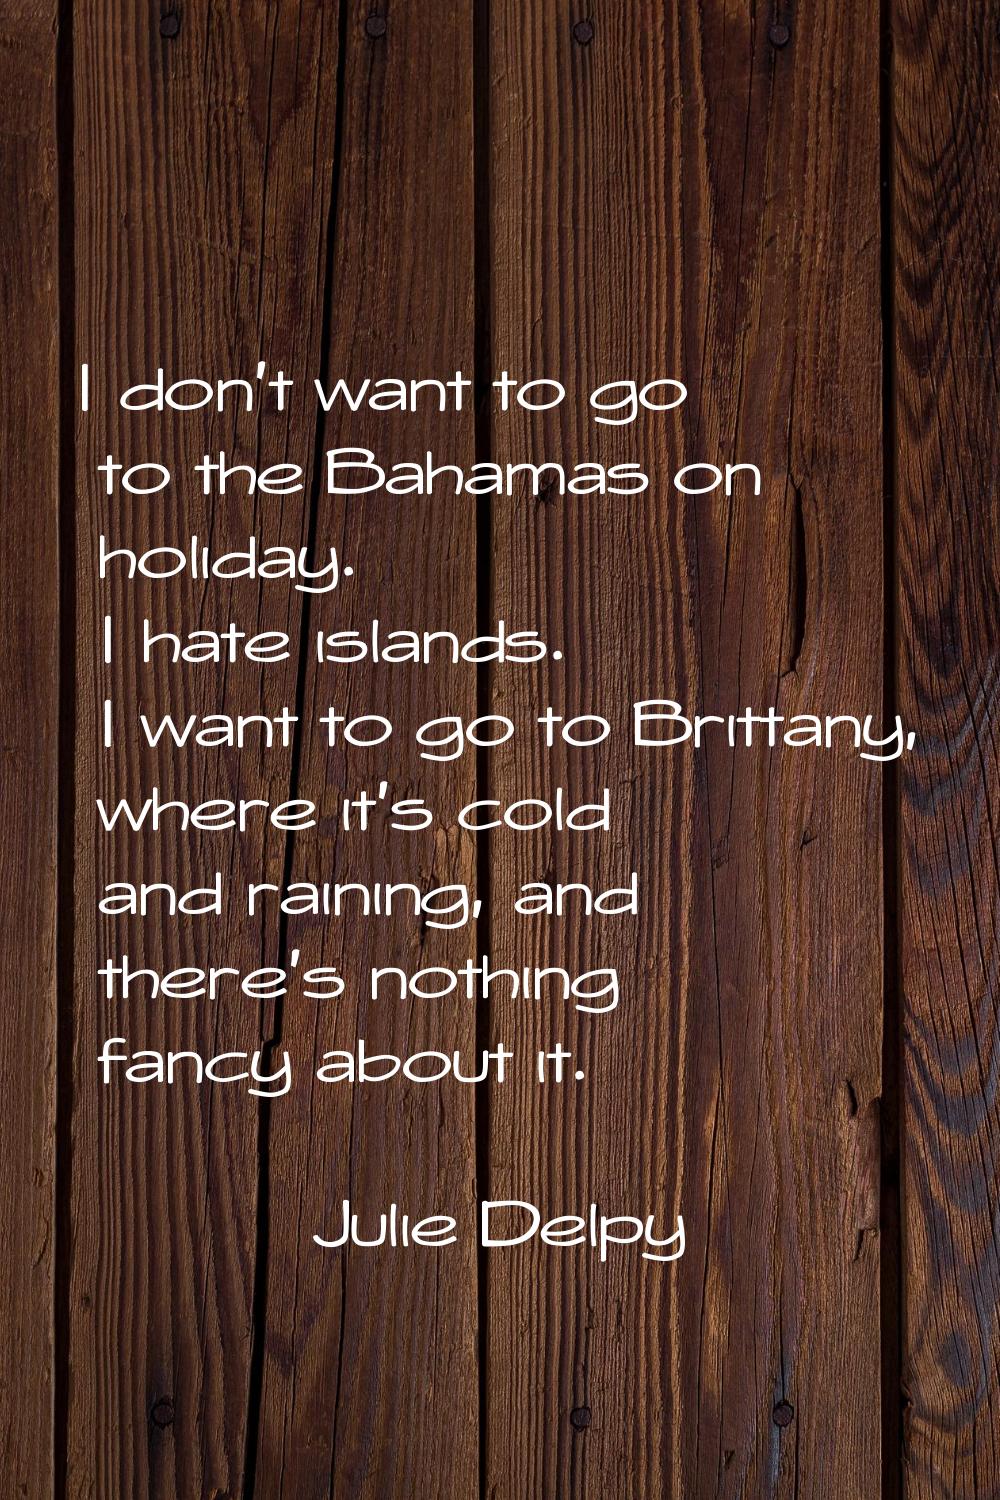 I don't want to go to the Bahamas on holiday. I hate islands. I want to go to Brittany, where it's 